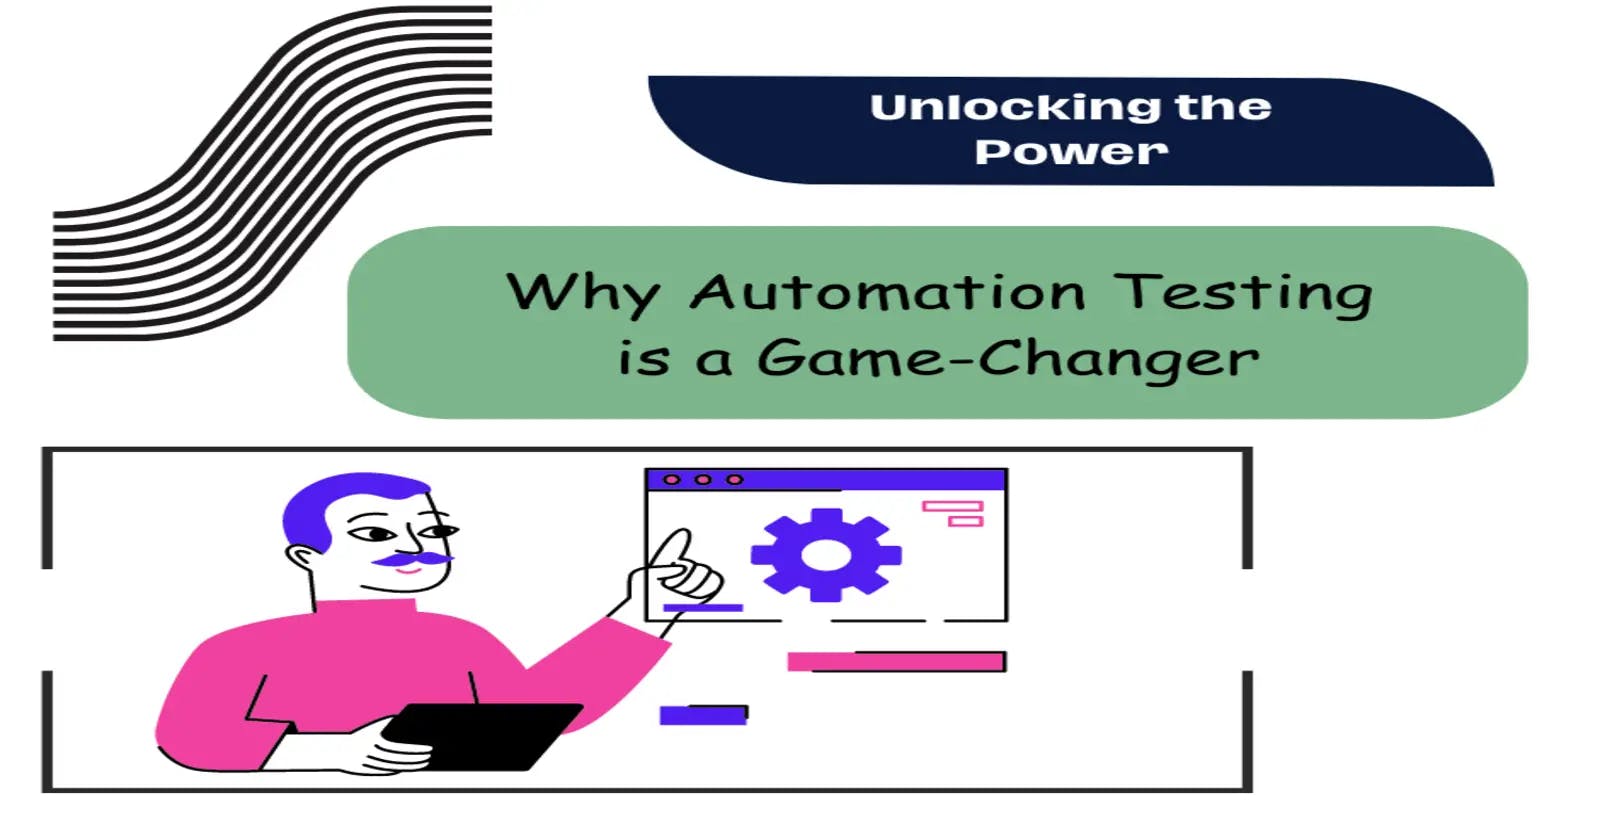 Unlocking the Power: Why Automation Testing is a Game-Changer